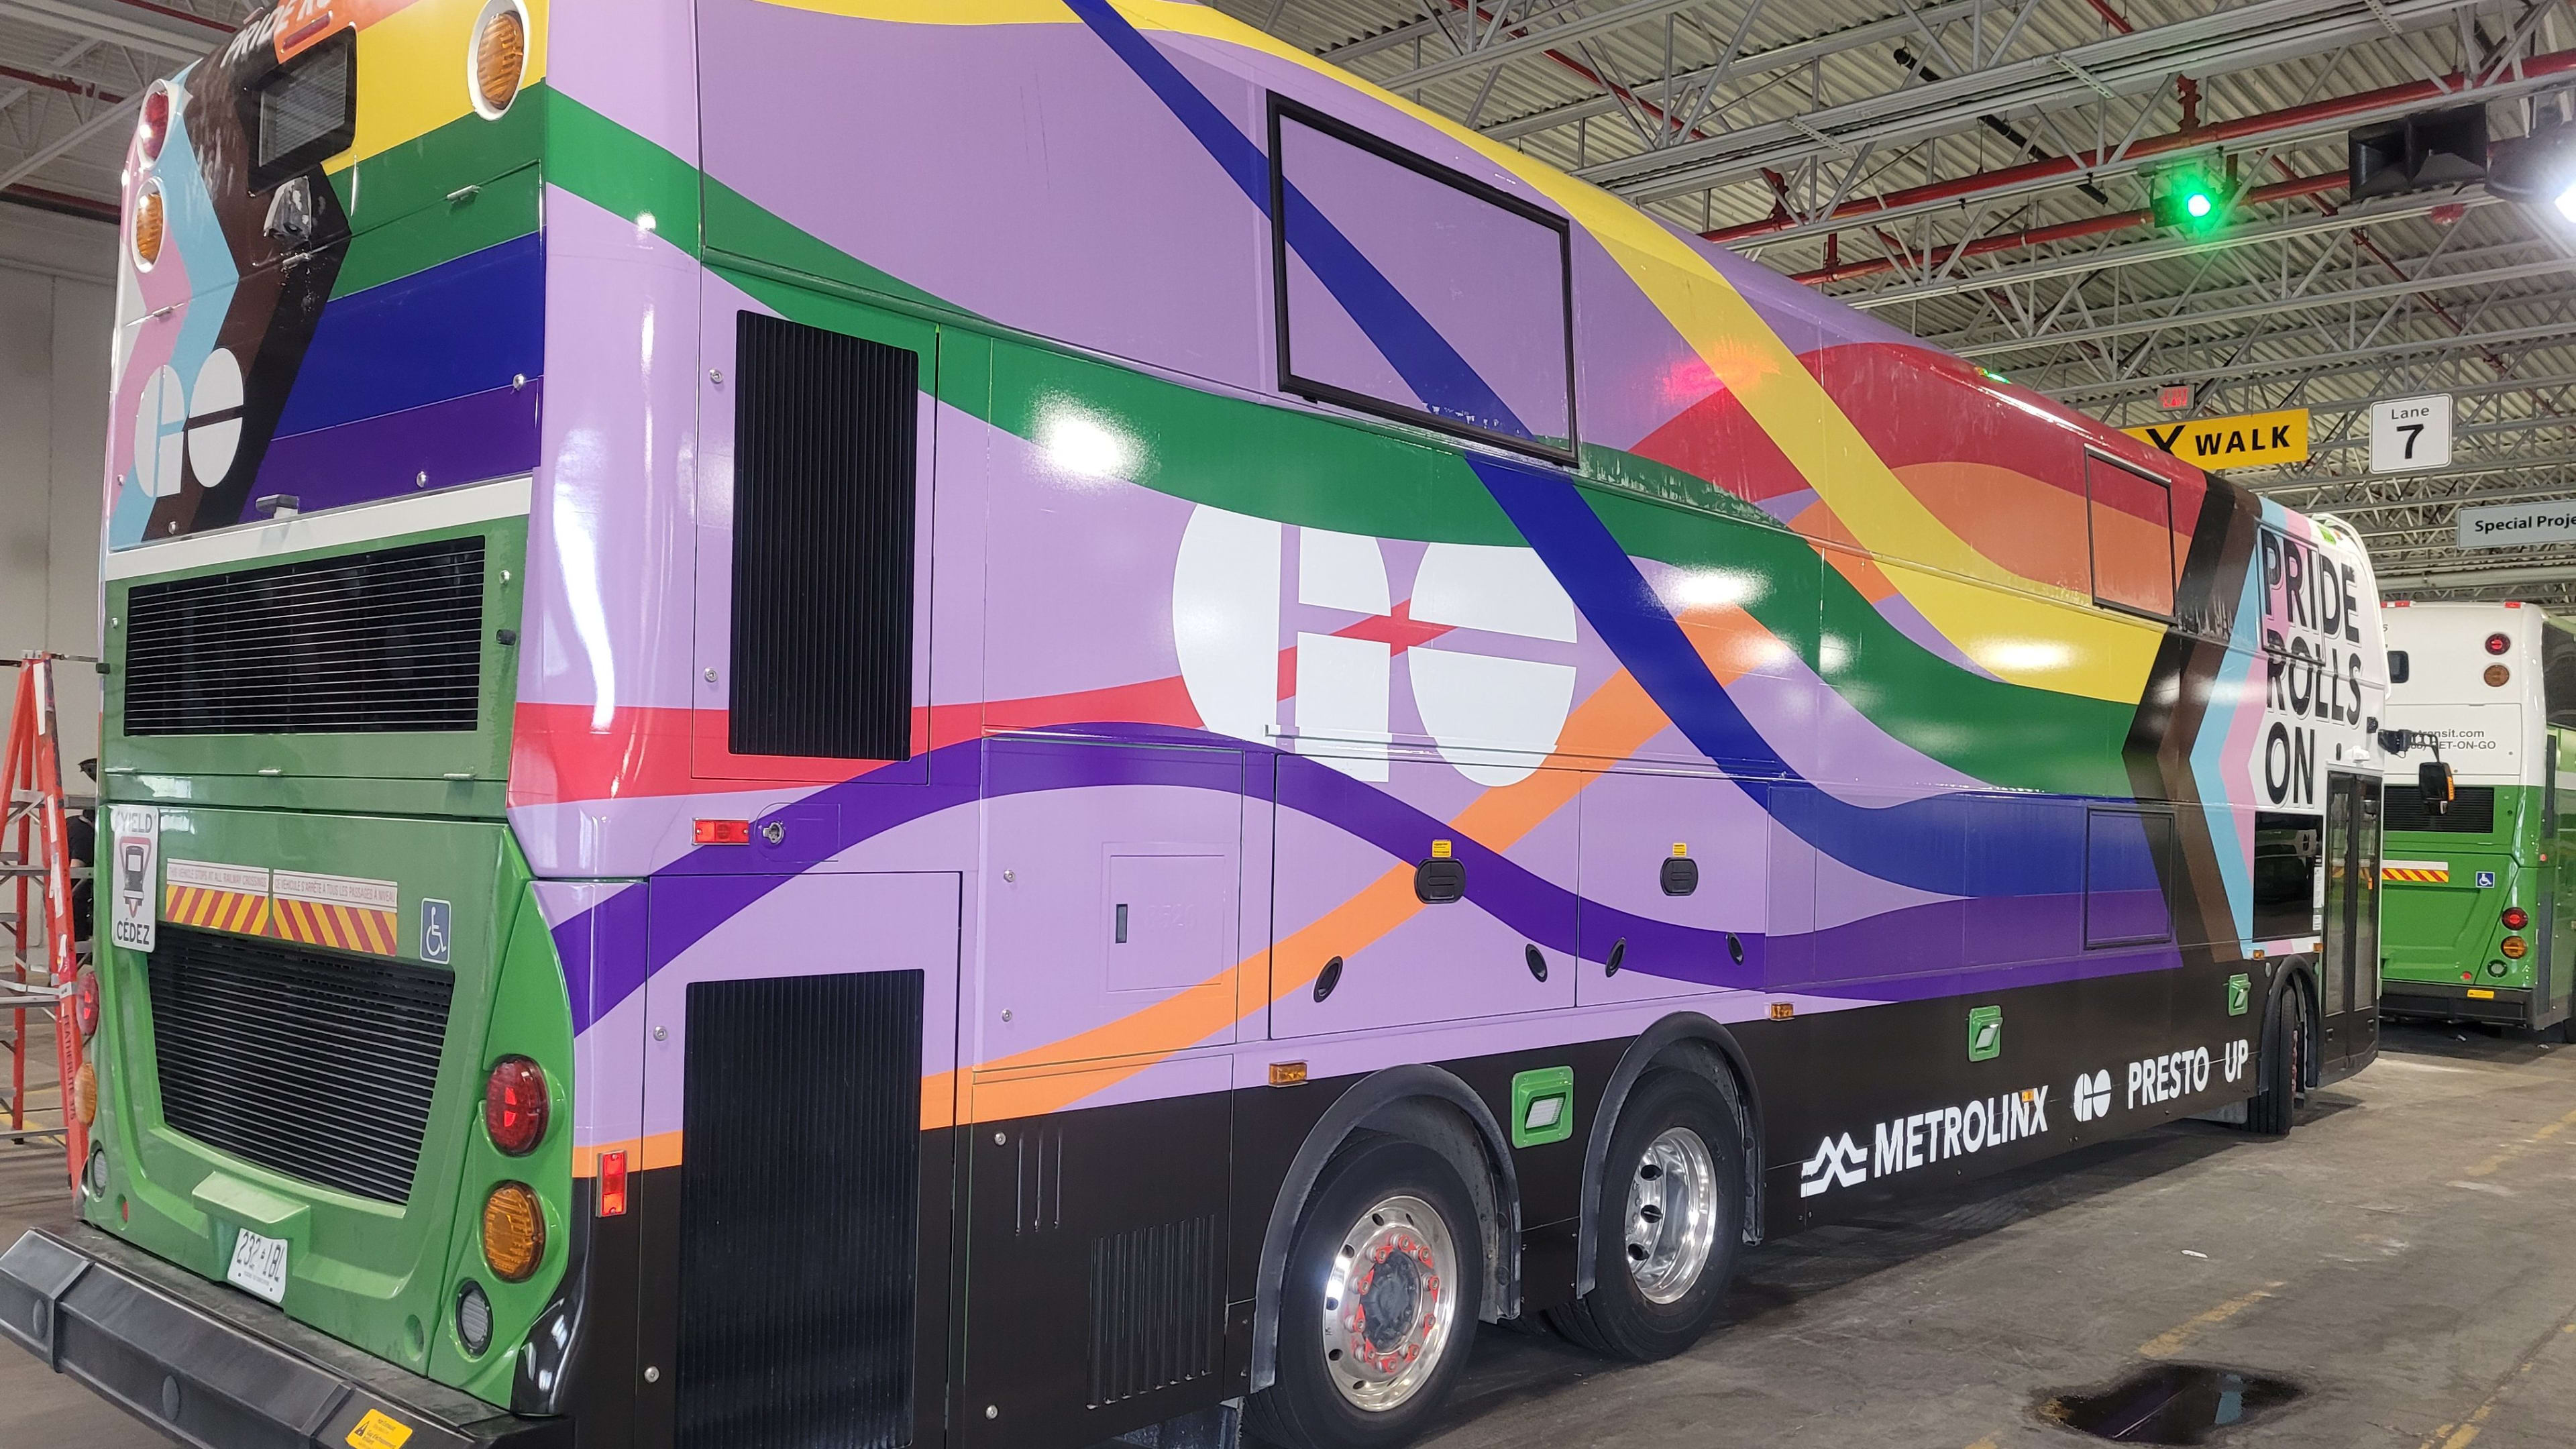 The special wrapped rainbow pride GO bus